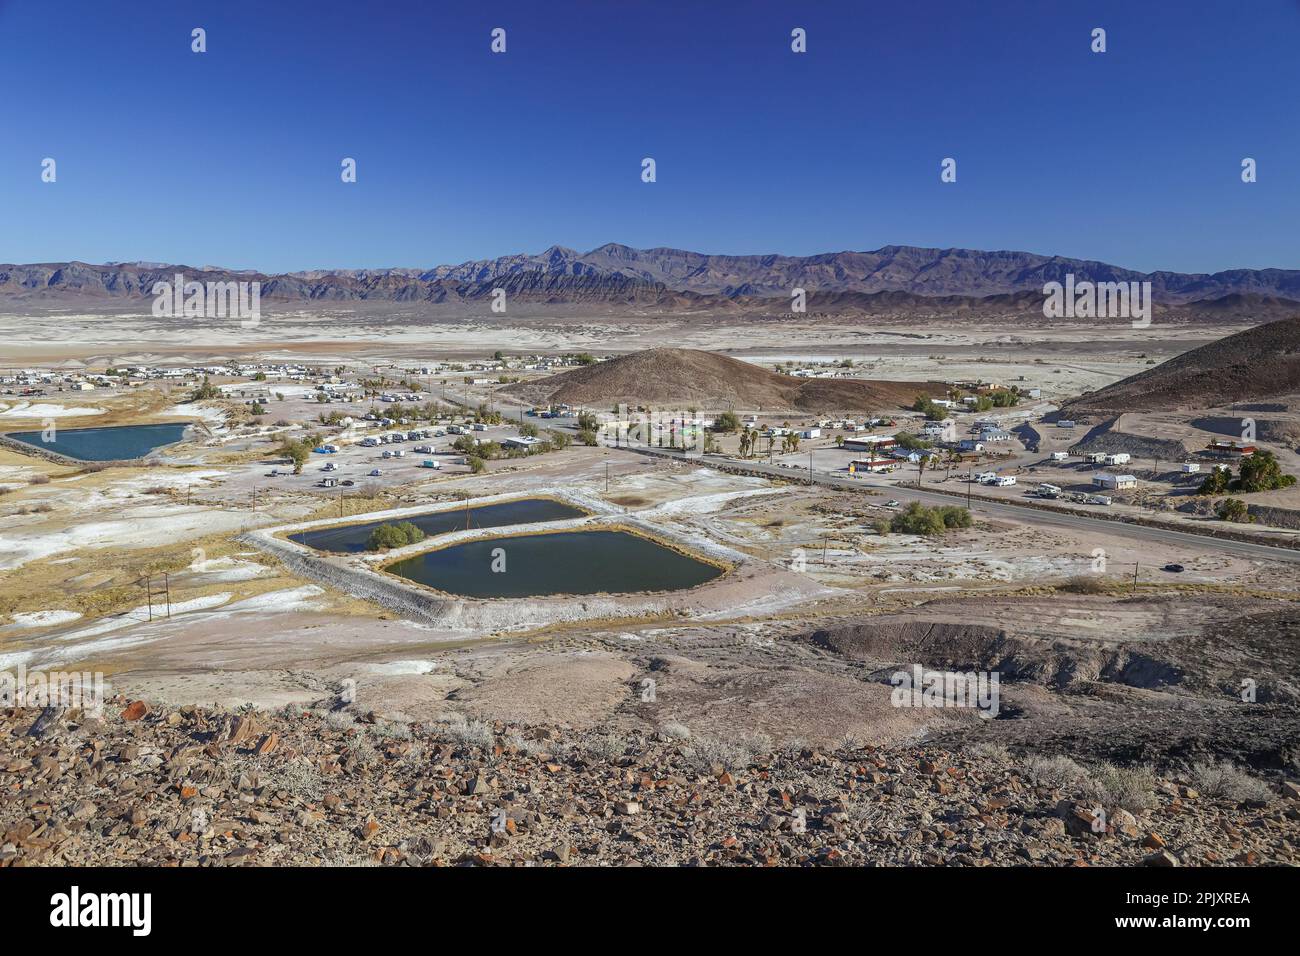 A view of the hot springs area of the Mojave Desert town of Tecopa in southeastern California. Stock Photo